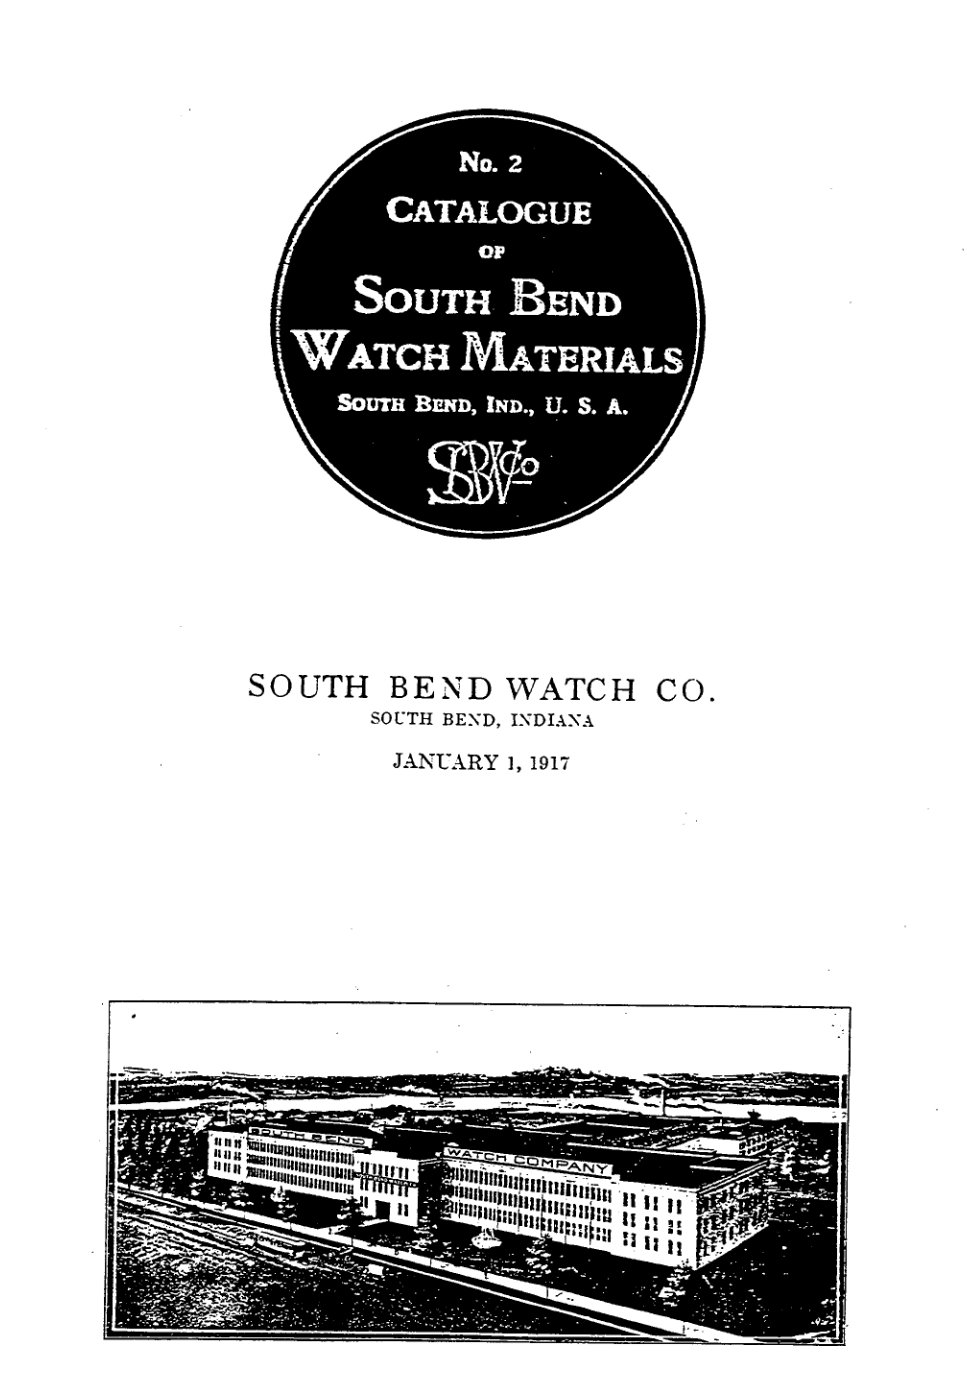 South Bend Watch Materials Catalog No. 2 (1917) Cover Image